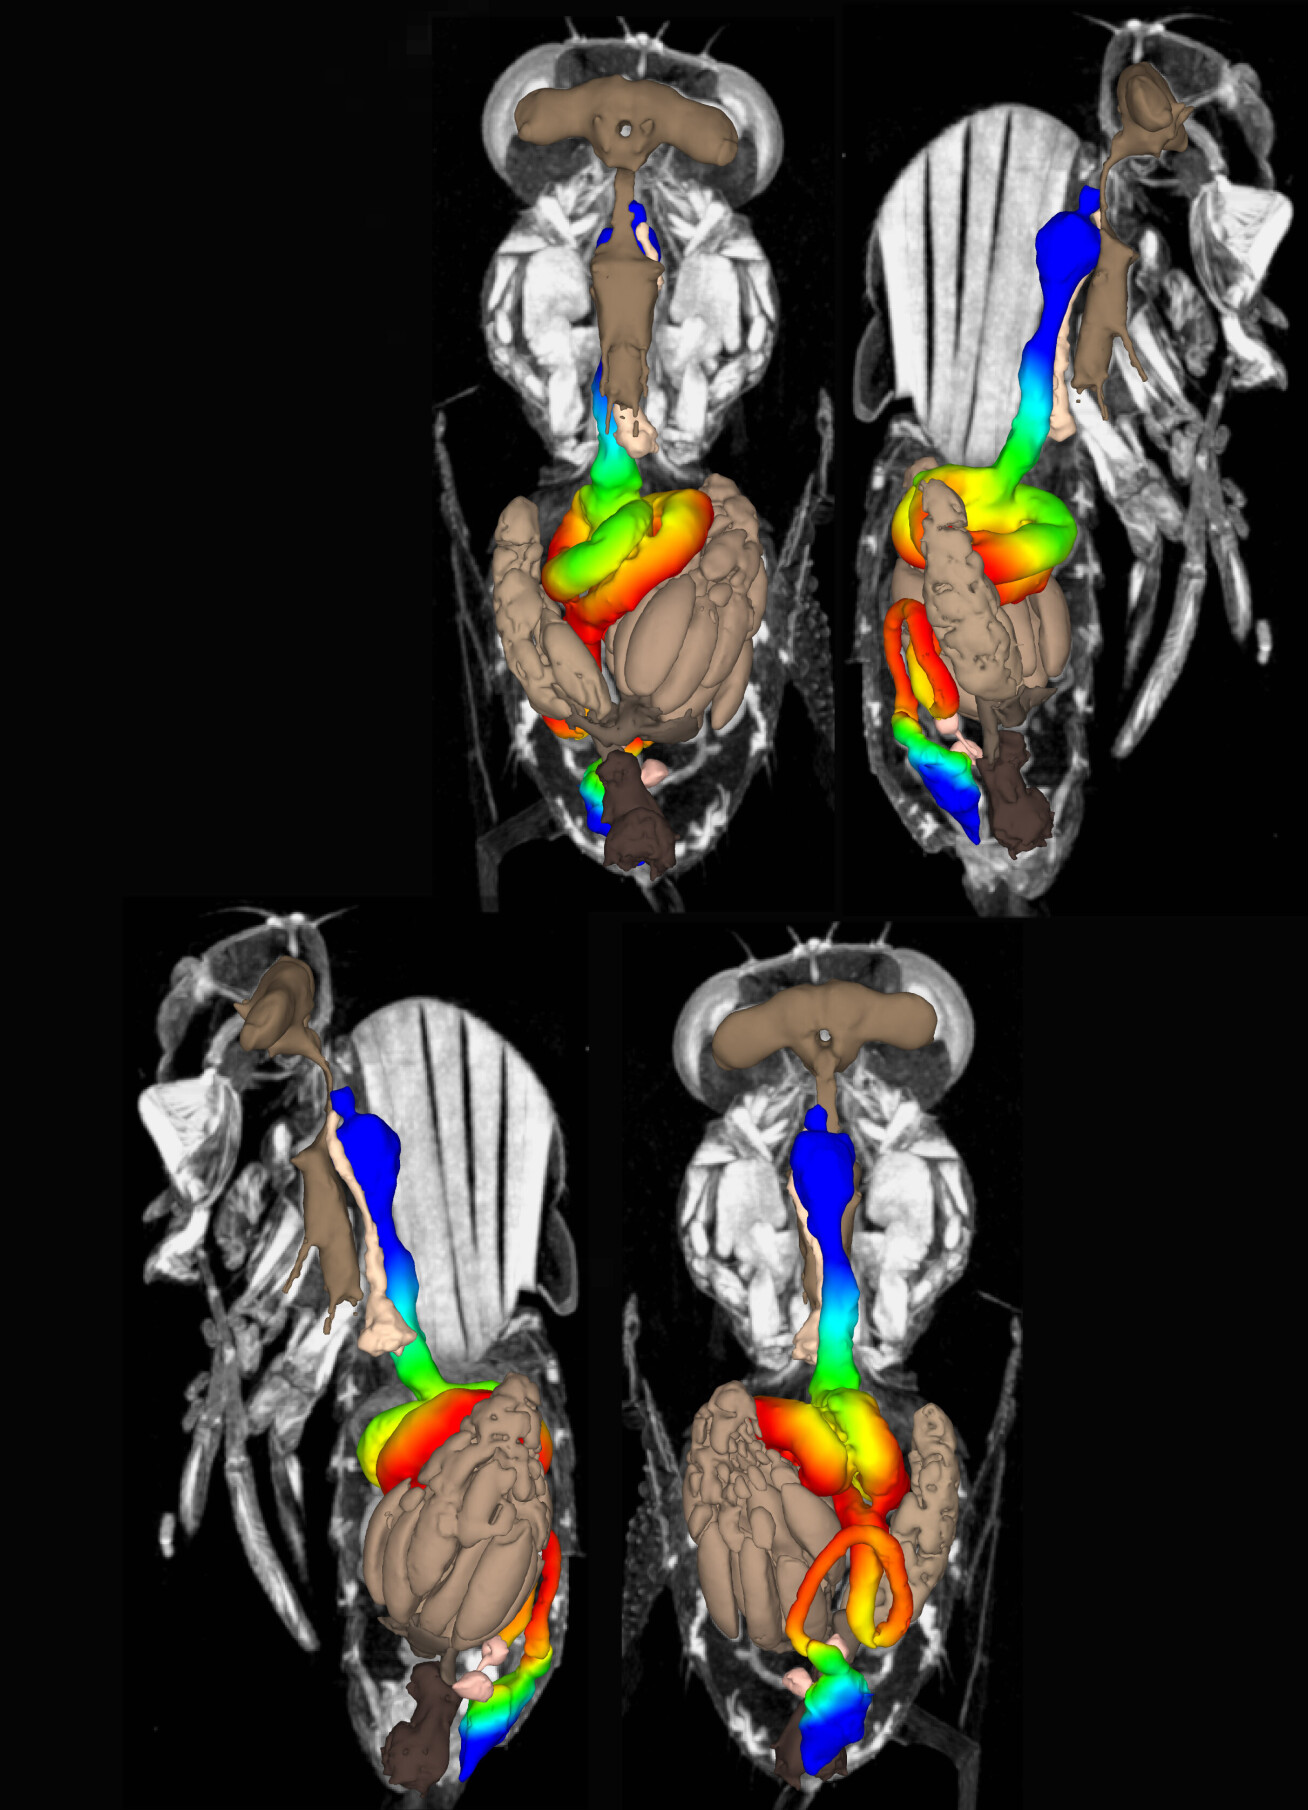 Cross-sections through microCT scan of female fruit fly overlaid with 3D models of organs, gut coloured by proximity to ovaries.